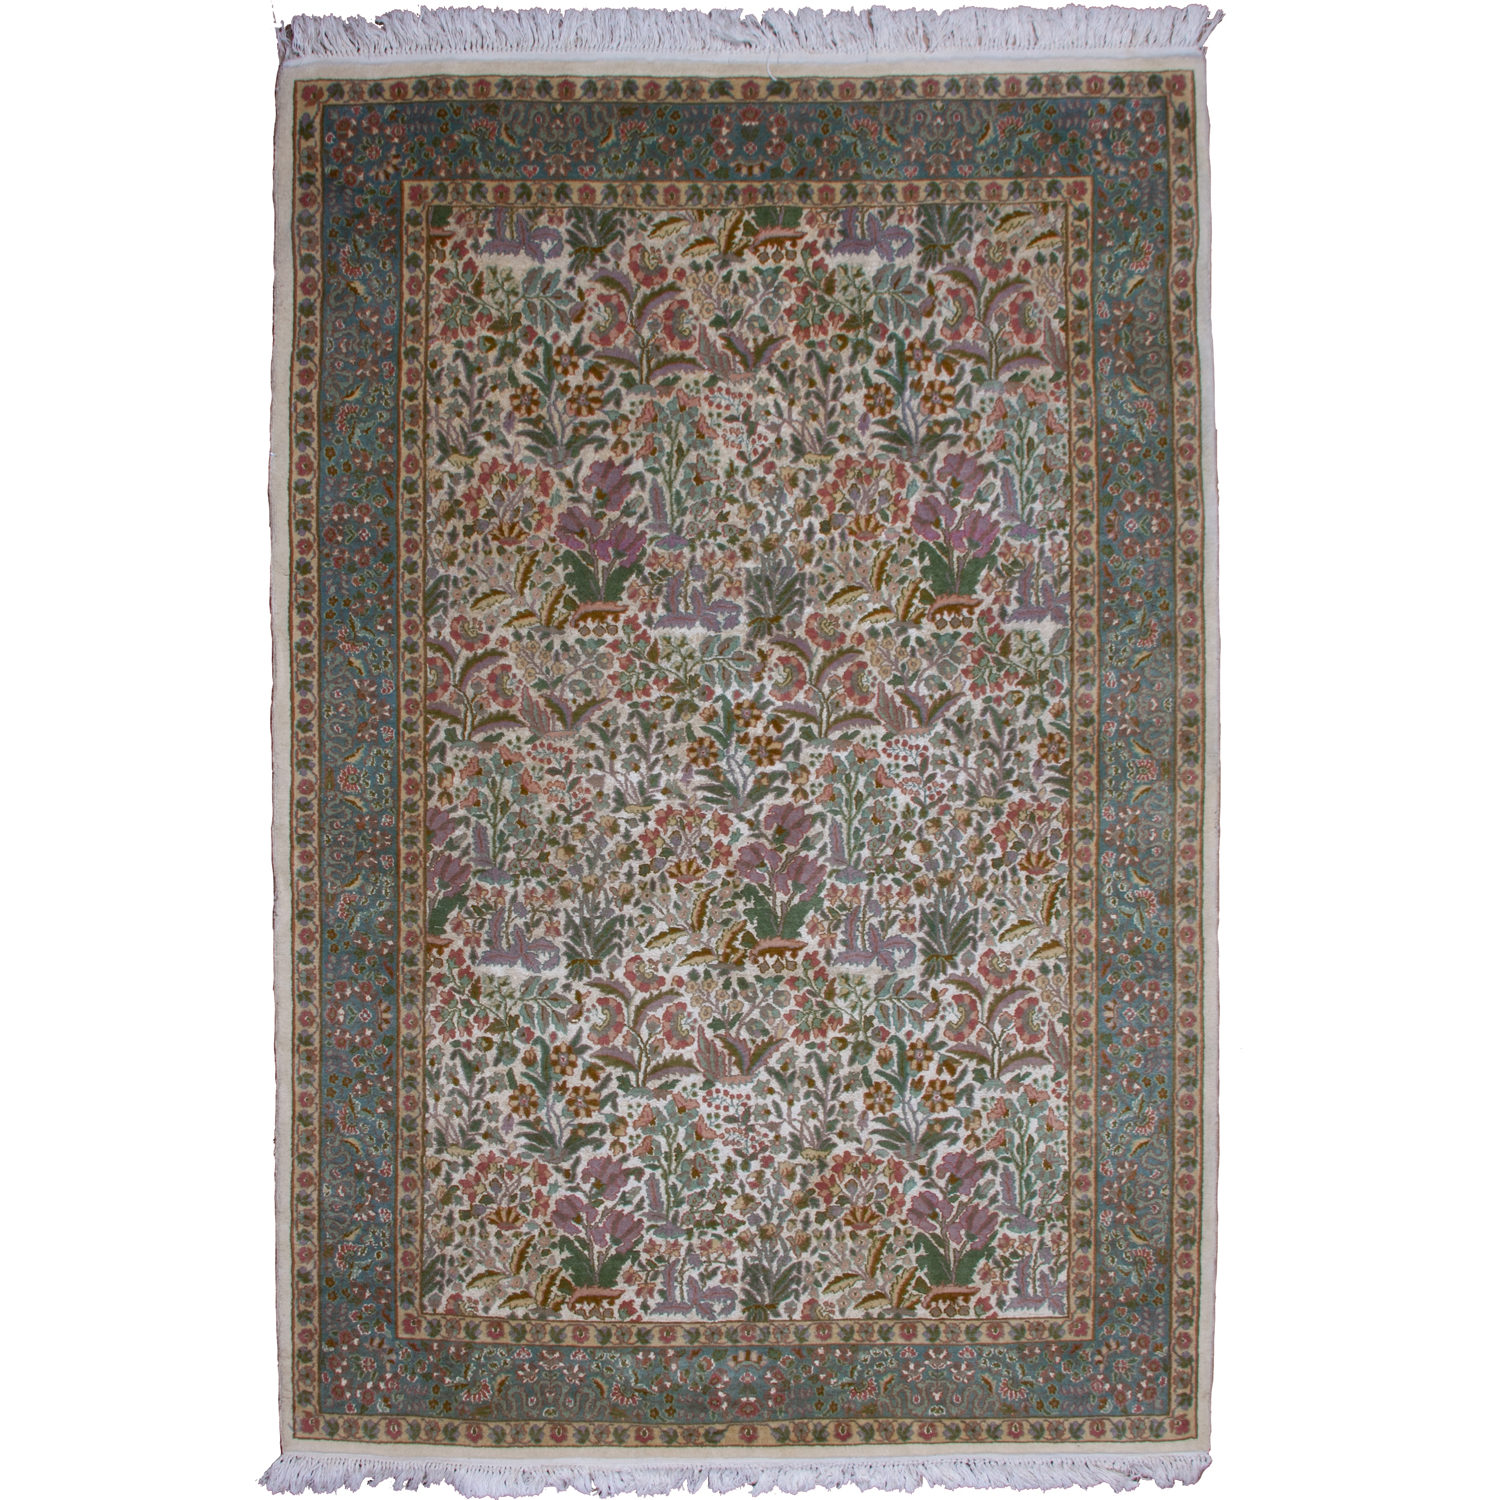 a 4x6 Rectangular Double Knot Rug Floral Design RugsTC 4'0 x 6'4 Pak Persian Area Rug with Silk & Wool Pile 100% Original Hand-Knotted in Gold,White,Green Colors 